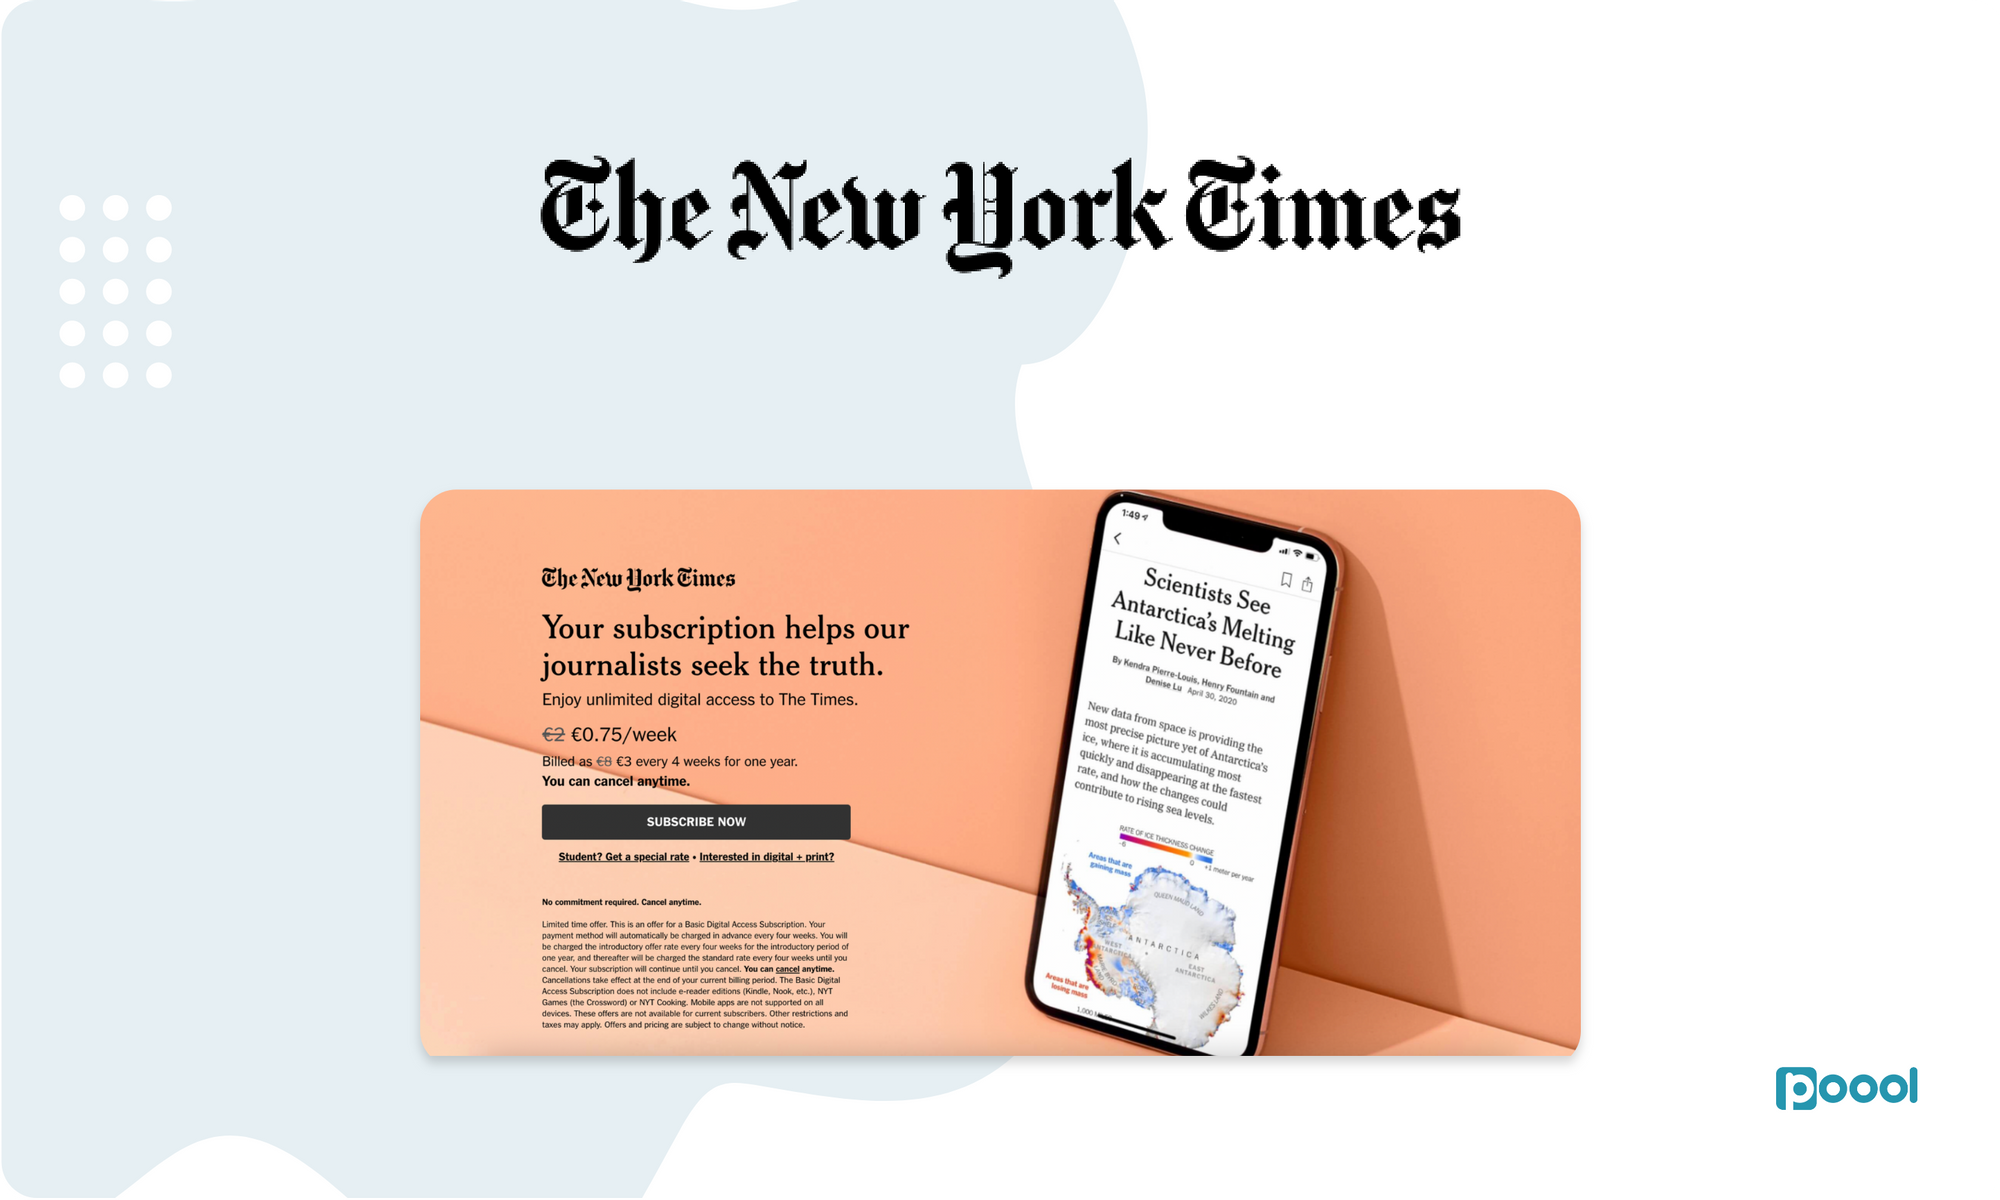 The New York Times Paywall